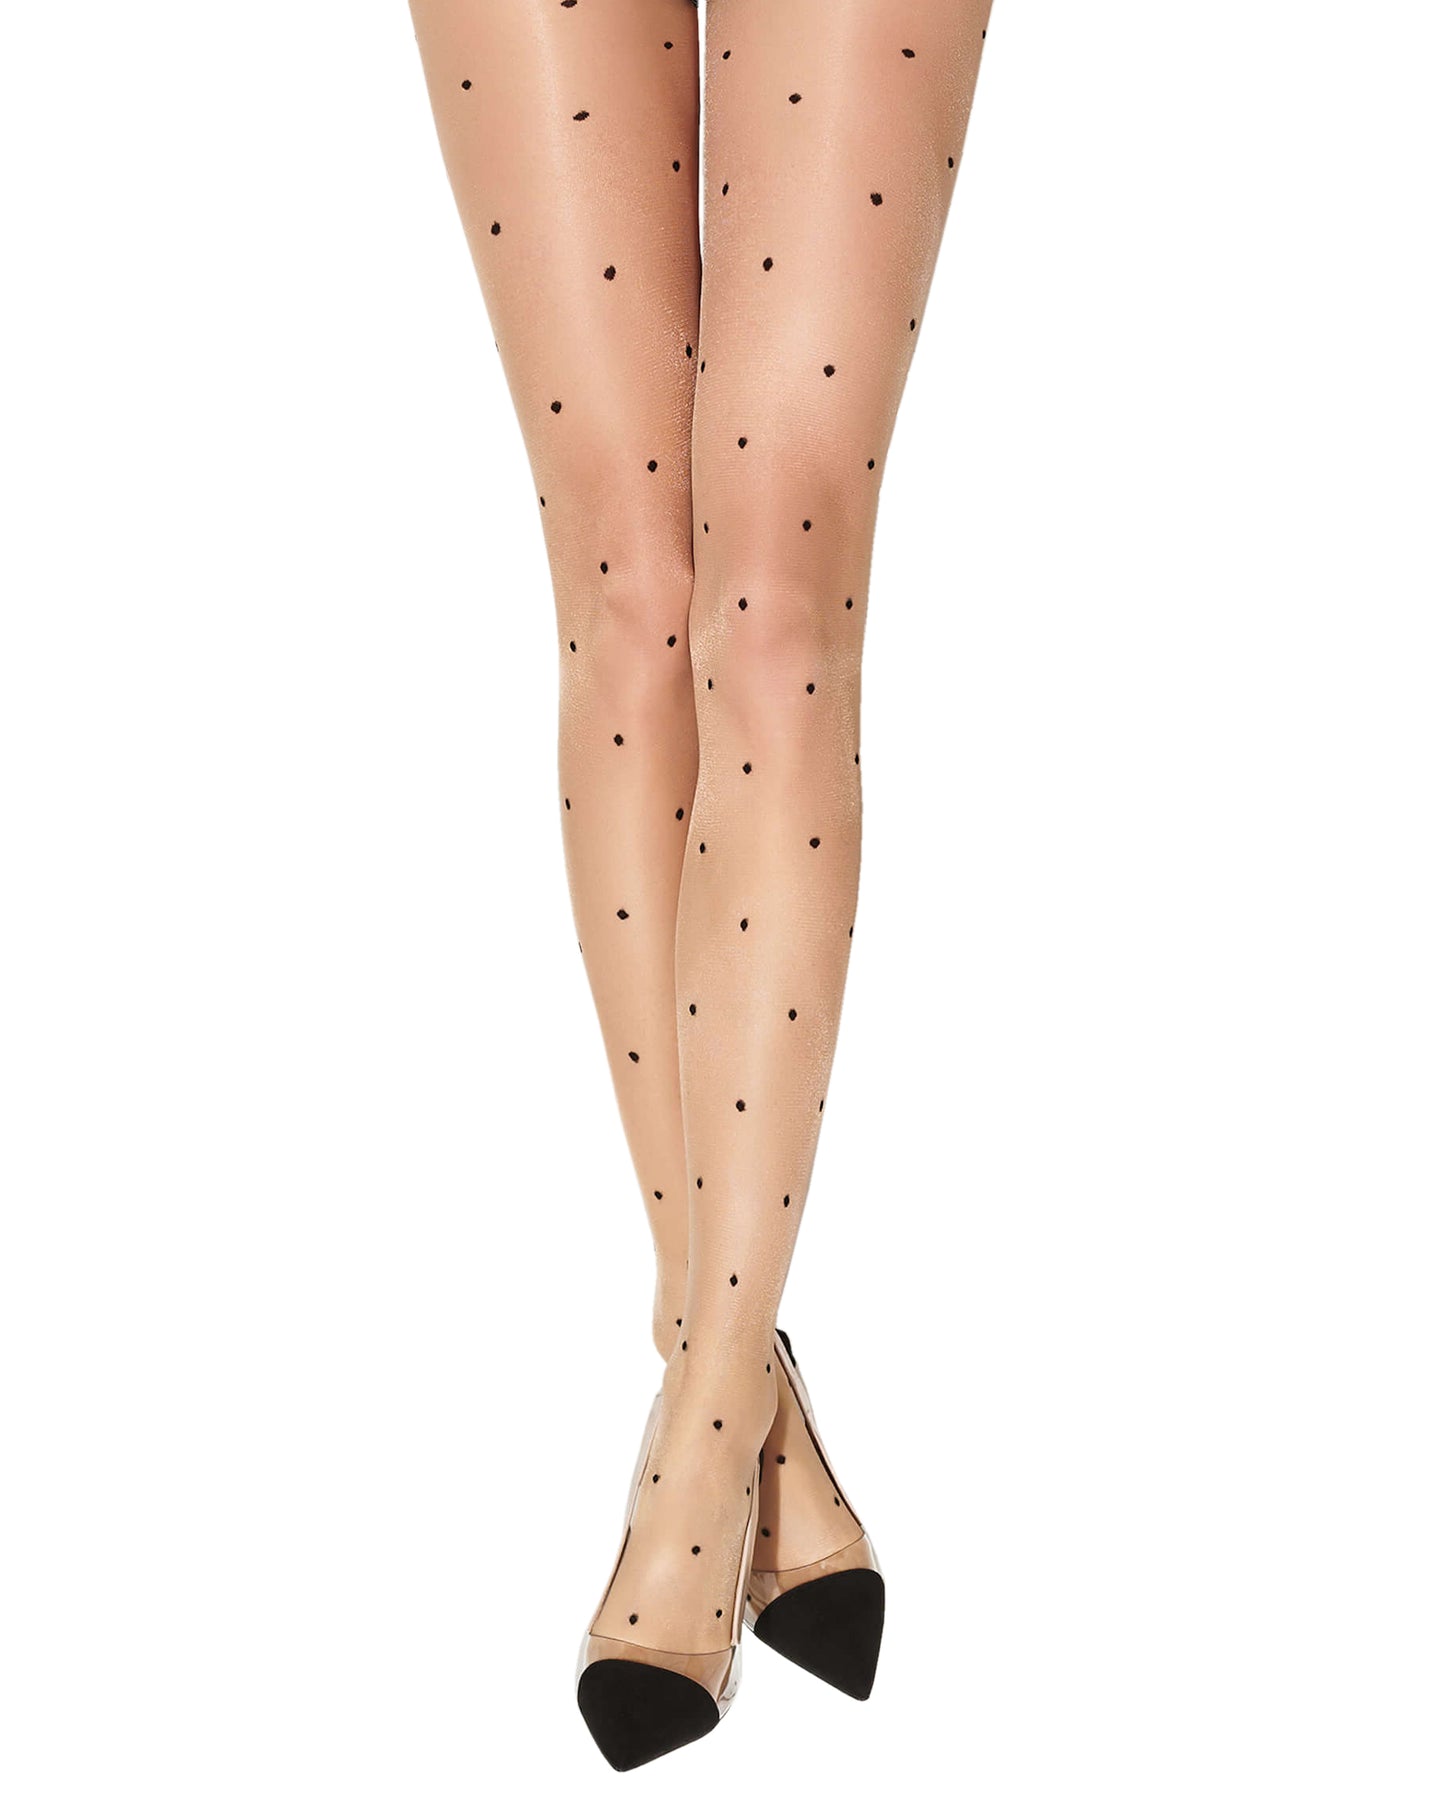 Trasparenze Anguria Tight - Sheer light tan (cosmetic) tights with black all over polka dot spot pattern